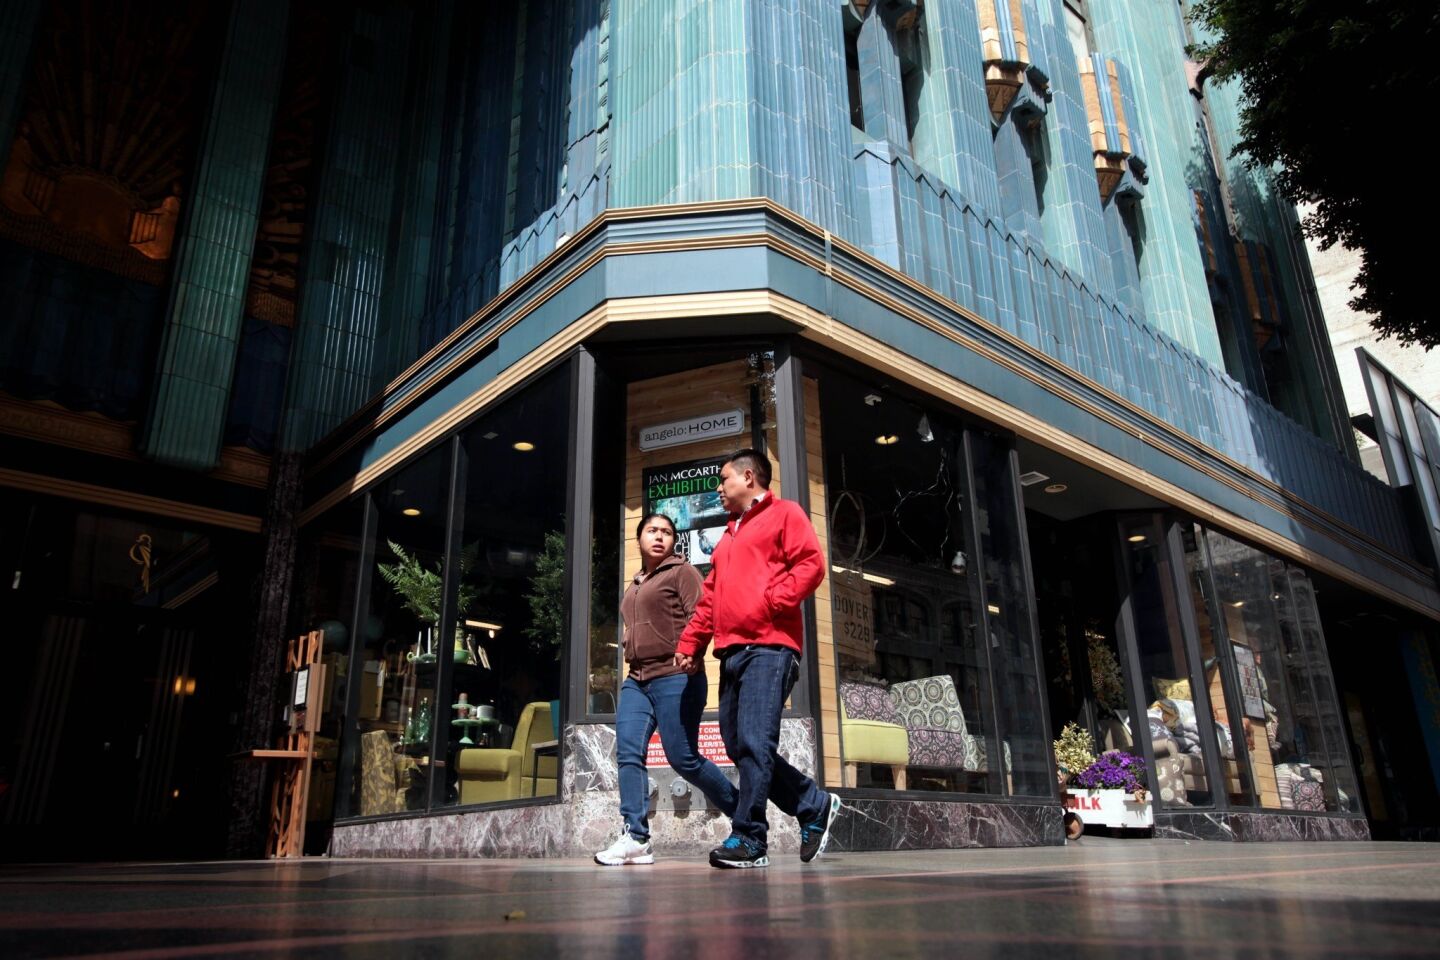 TV personality Angelo Surmelis' new store, angelo:Home, fills a storefront in the landmark Eastern Columbia building in downtown Los Angeles.